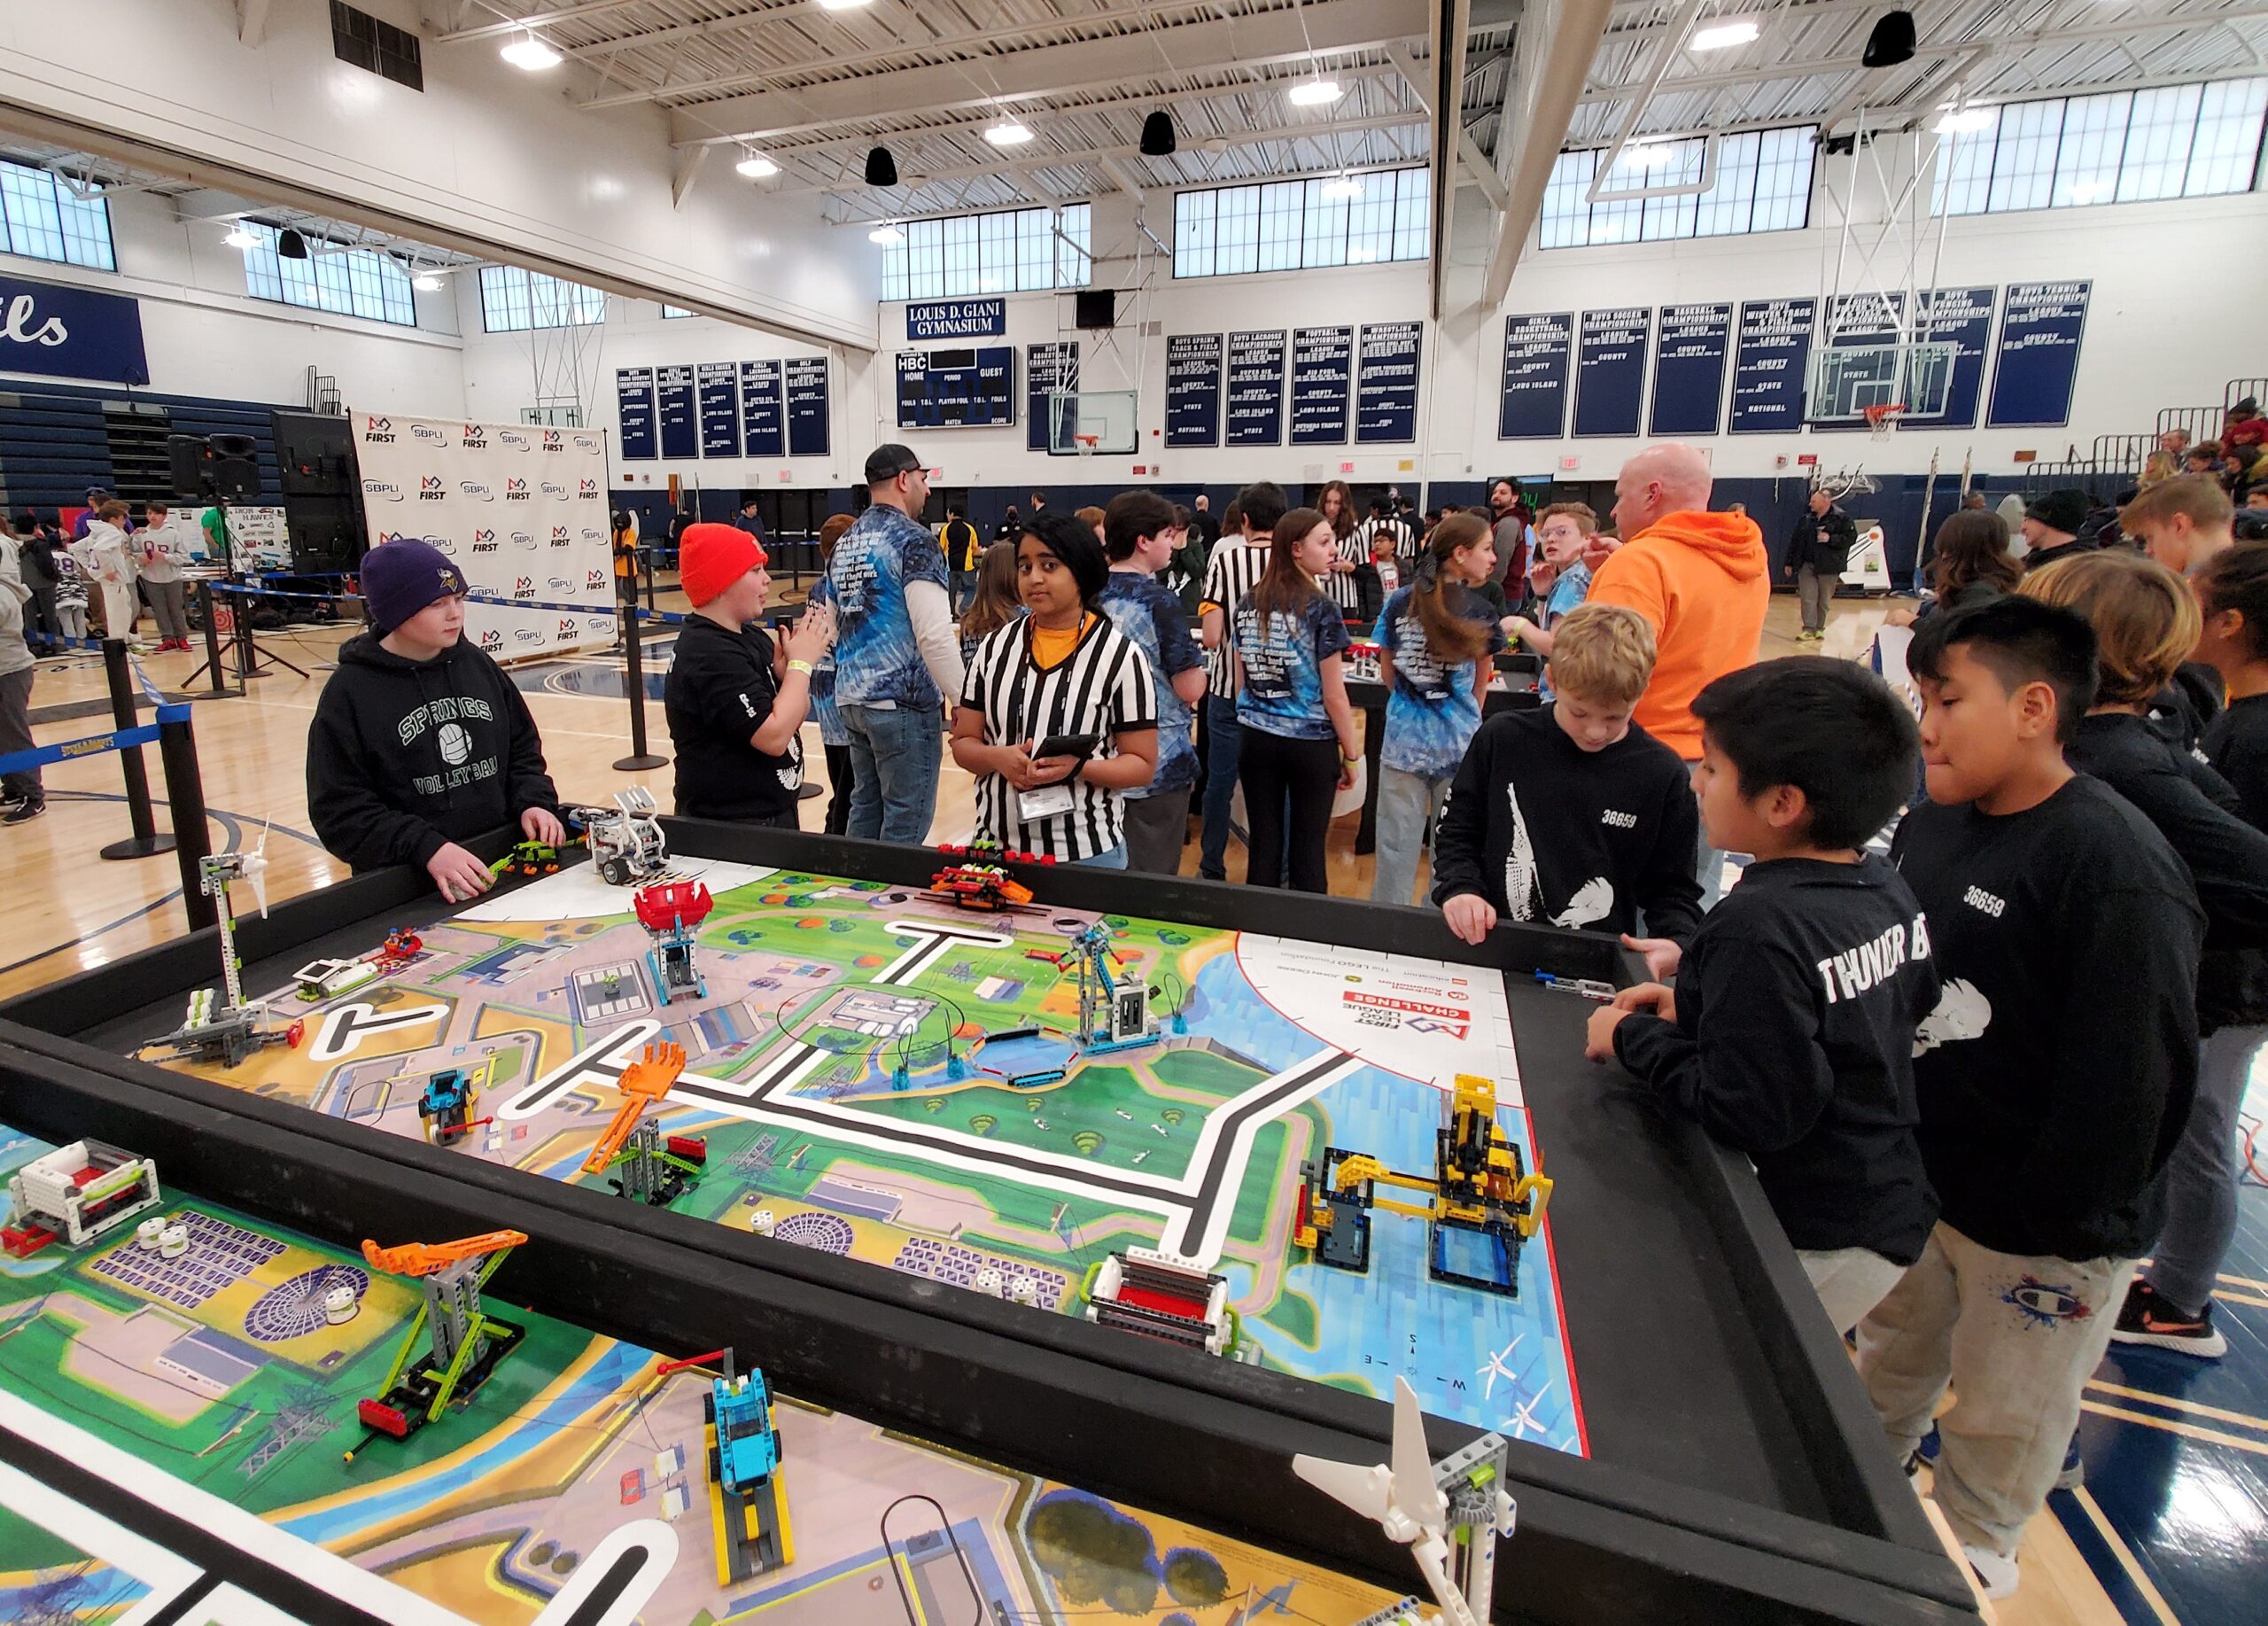 Springs School's robotics team Thunder Bots compete during the FIRST Lego League qualifiers at Huntington High School January 21. ERIK SCHWAB